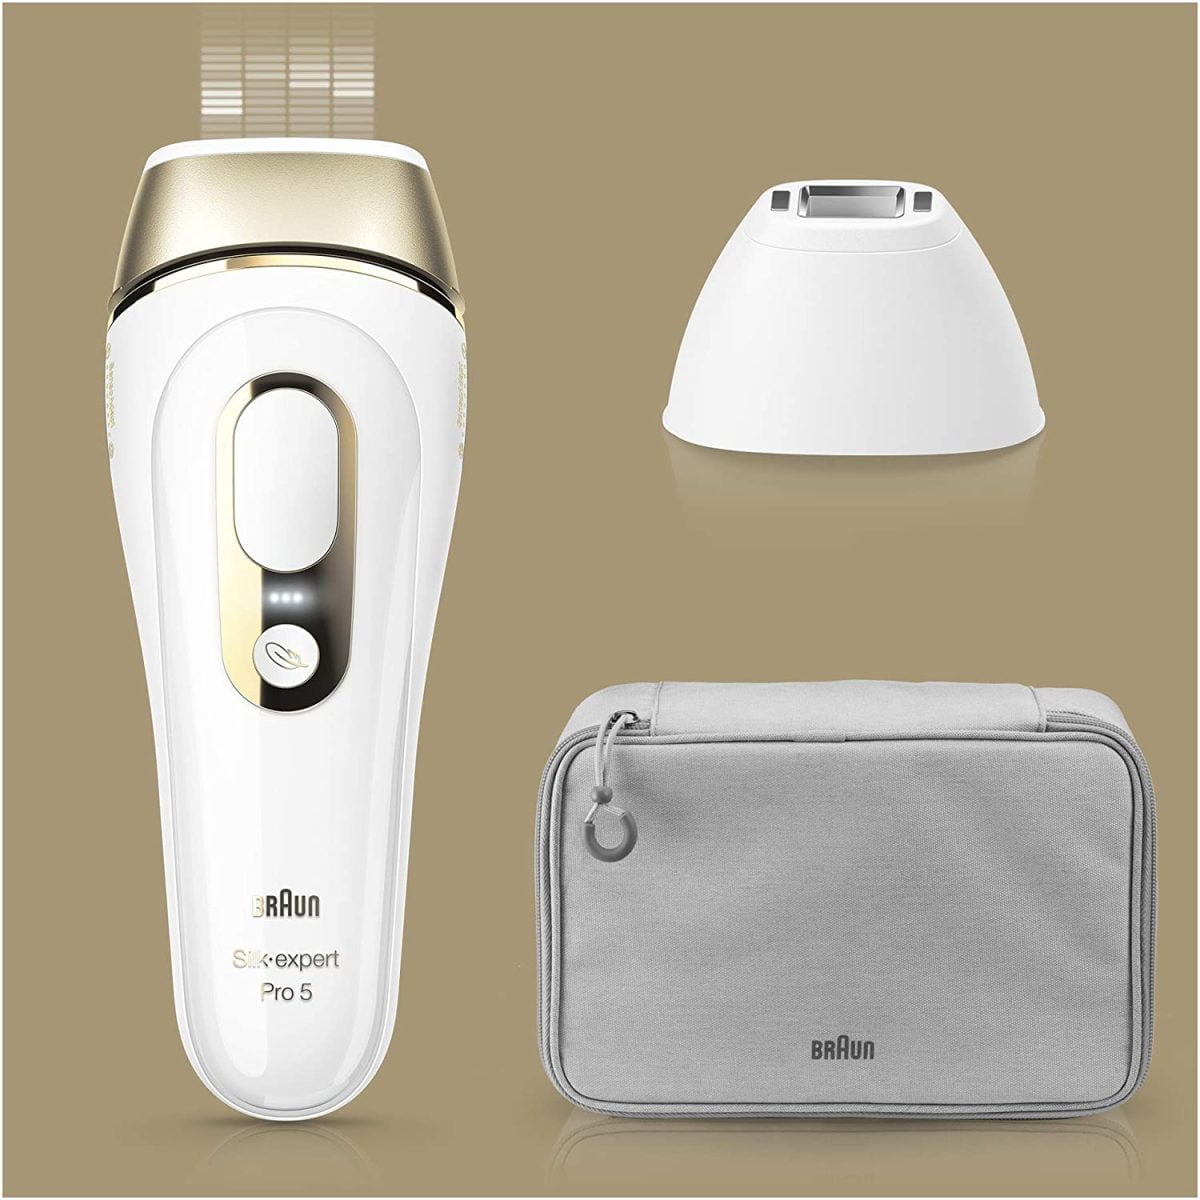 817Xuzrlqvl. Ac Sl1500 Braun &Lt;H1&Gt;Braun Silk Expert Pro 5 Pl5117 Latest Generation Ipl, Permanent Hair Removal&Lt;/H1&Gt; Https://Www.youtube.com/Watch?V=N-T6D6Jn588 &Lt;Ul Class=&Quot;A-Unordered-List A-Vertical A-Spacing-Mini&Quot;&Gt; &Lt;Li&Gt;&Lt;Span Class=&Quot;A-List-Item&Quot;&Gt;Braun’s Latest Generation Ipl. The Safest, Fastest And Most Efficient Ipl*. Permanent Hair Reduction In Just 4 Weeks*. &Lt;/Span&Gt;&Lt;/Li&Gt; &Lt;Li&Gt;&Lt;Span Class=&Quot;A-List-Item&Quot;&Gt; The Safest Ipl Technology. Clinically Tested And Dermatologically Accredited As Skin Safe By An International Skin Health Organization (Skin Health Alliance) &Lt;/Span&Gt;&Lt;/Li&Gt; &Lt;Li&Gt;&Lt;Span Class=&Quot;A-List-Item&Quot;&Gt; Smart Ipl With Sensoadapttm Skin Sensor (With Uv Protection): The Only Ipl Technology That Automatically And Continuously Adapts To Your Skin Tone &Lt;/Span&Gt;&Lt;/Li&Gt; &Lt;Li&Gt;&Lt;Span Class=&Quot;A-List-Item&Quot;&Gt; The Fastest Ipl: Treat Both Legs In Less Than 5 Minutes At The Lowest Energy Level. 2 Times Faster Than The Previous Silk·expert 5. Includes Precision Head, Premium Pouch And Venus Razor &Lt;/Span&Gt;&Lt;/Li&Gt; &Lt;Li&Gt;&Lt;Span Class=&Quot;A-List-Item&Quot;&Gt; New Compact Design, 15% Smaller And 25% Lighter, For Easy Handling And Effortless Treatment. 4, Flashes, 3% More Than Previous Silk·expert 5 &Lt;/Span&Gt;&Lt;/Li&Gt; &Lt;Li&Gt;&Lt;Span Class=&Quot;A-List-Item&Quot;&Gt; Also Suitable For Men: The Silk-Expert Pro Is The Perfect Tool To Tackle Hair On The Chest, Back, Arms, Stomach And Legs&Lt;/Span&Gt;&Lt;/Li&Gt; &Lt;Li&Gt;400,000 Flashes In Total&Lt;/Li&Gt; &Lt;/Ul&Gt; Hair Removal Braun Silk Expert Pro 5 Pl5117 Latest Generation Ipl, Permanent Hair Removal